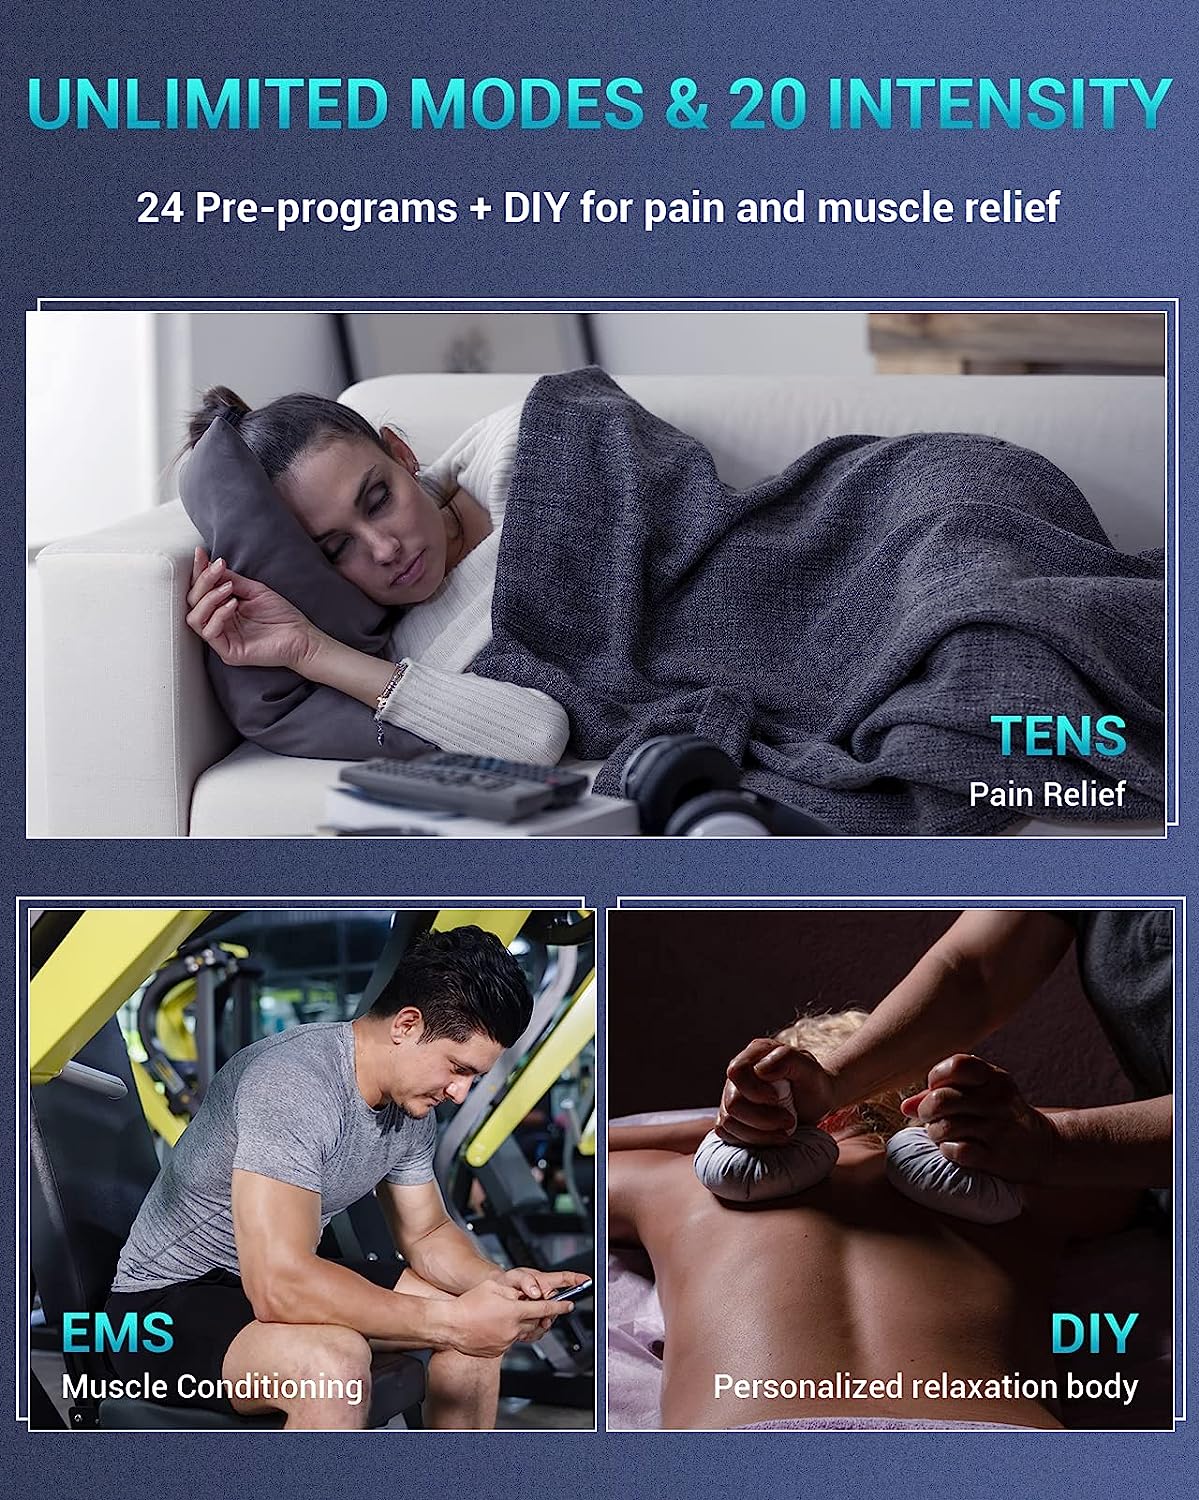  TENKER EMS TENS Unit Muscle Stimulator, 24 Modes Dual Channel  Electronic Pulse Massager for Pain Relief/Management & Muscle Strength  Rechargeable TENS Machine with 8 Pcs Electrode Pads : Health & Household